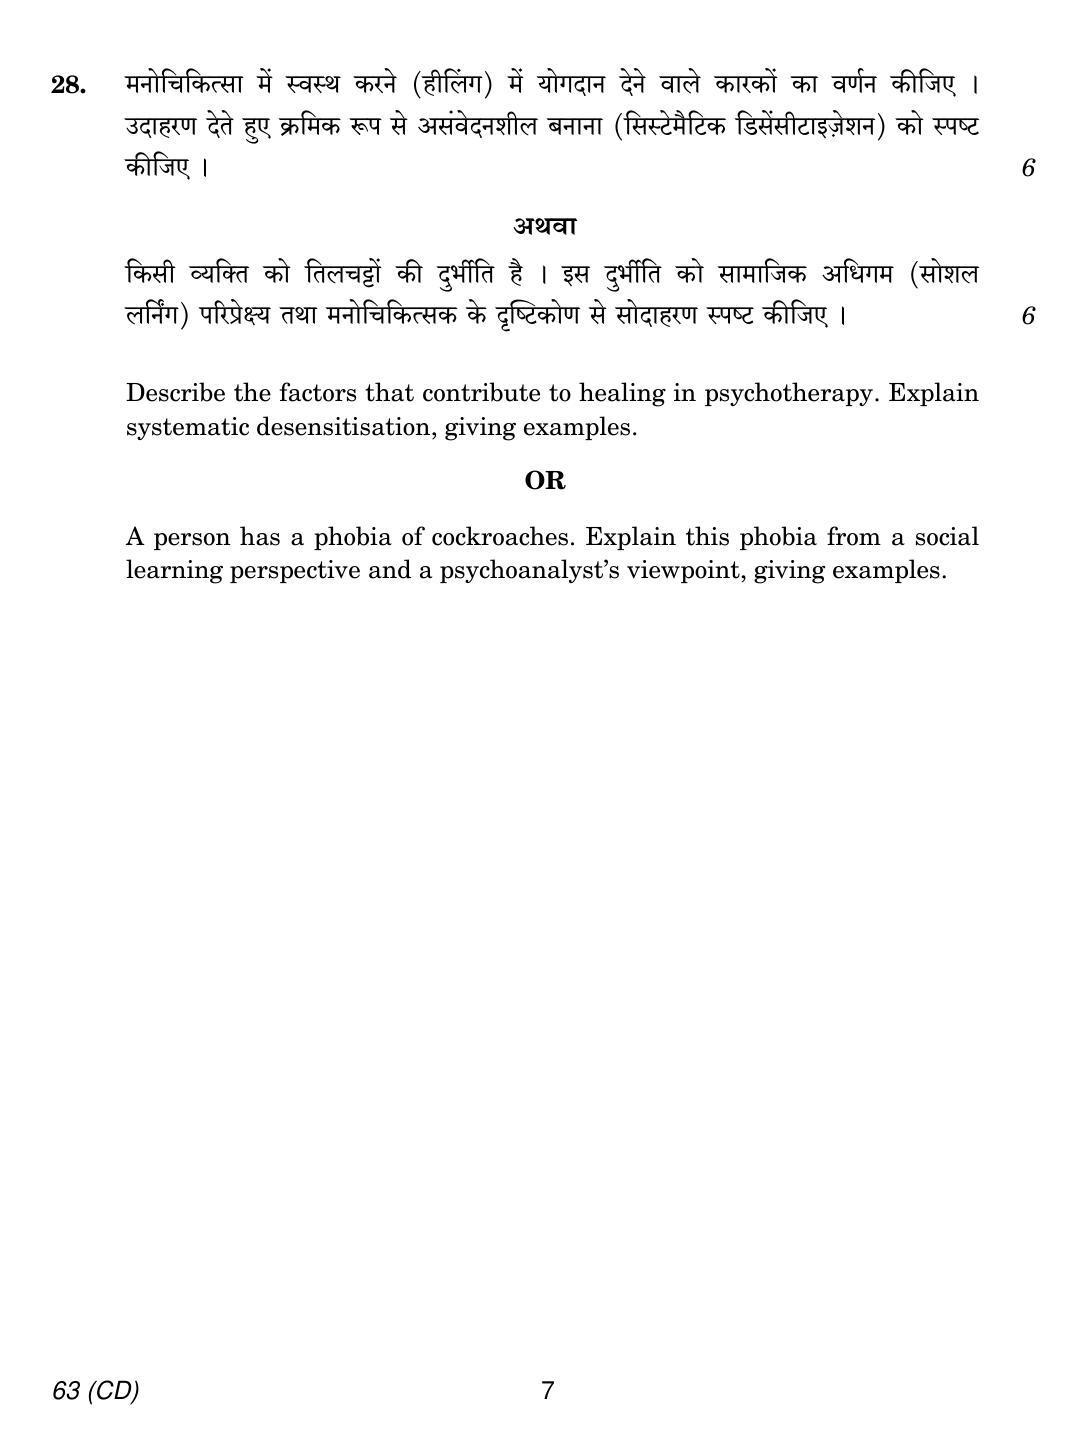 CBSE Class 12 63 PSYCHOLOGY CD 2018 Question Paper - Page 7